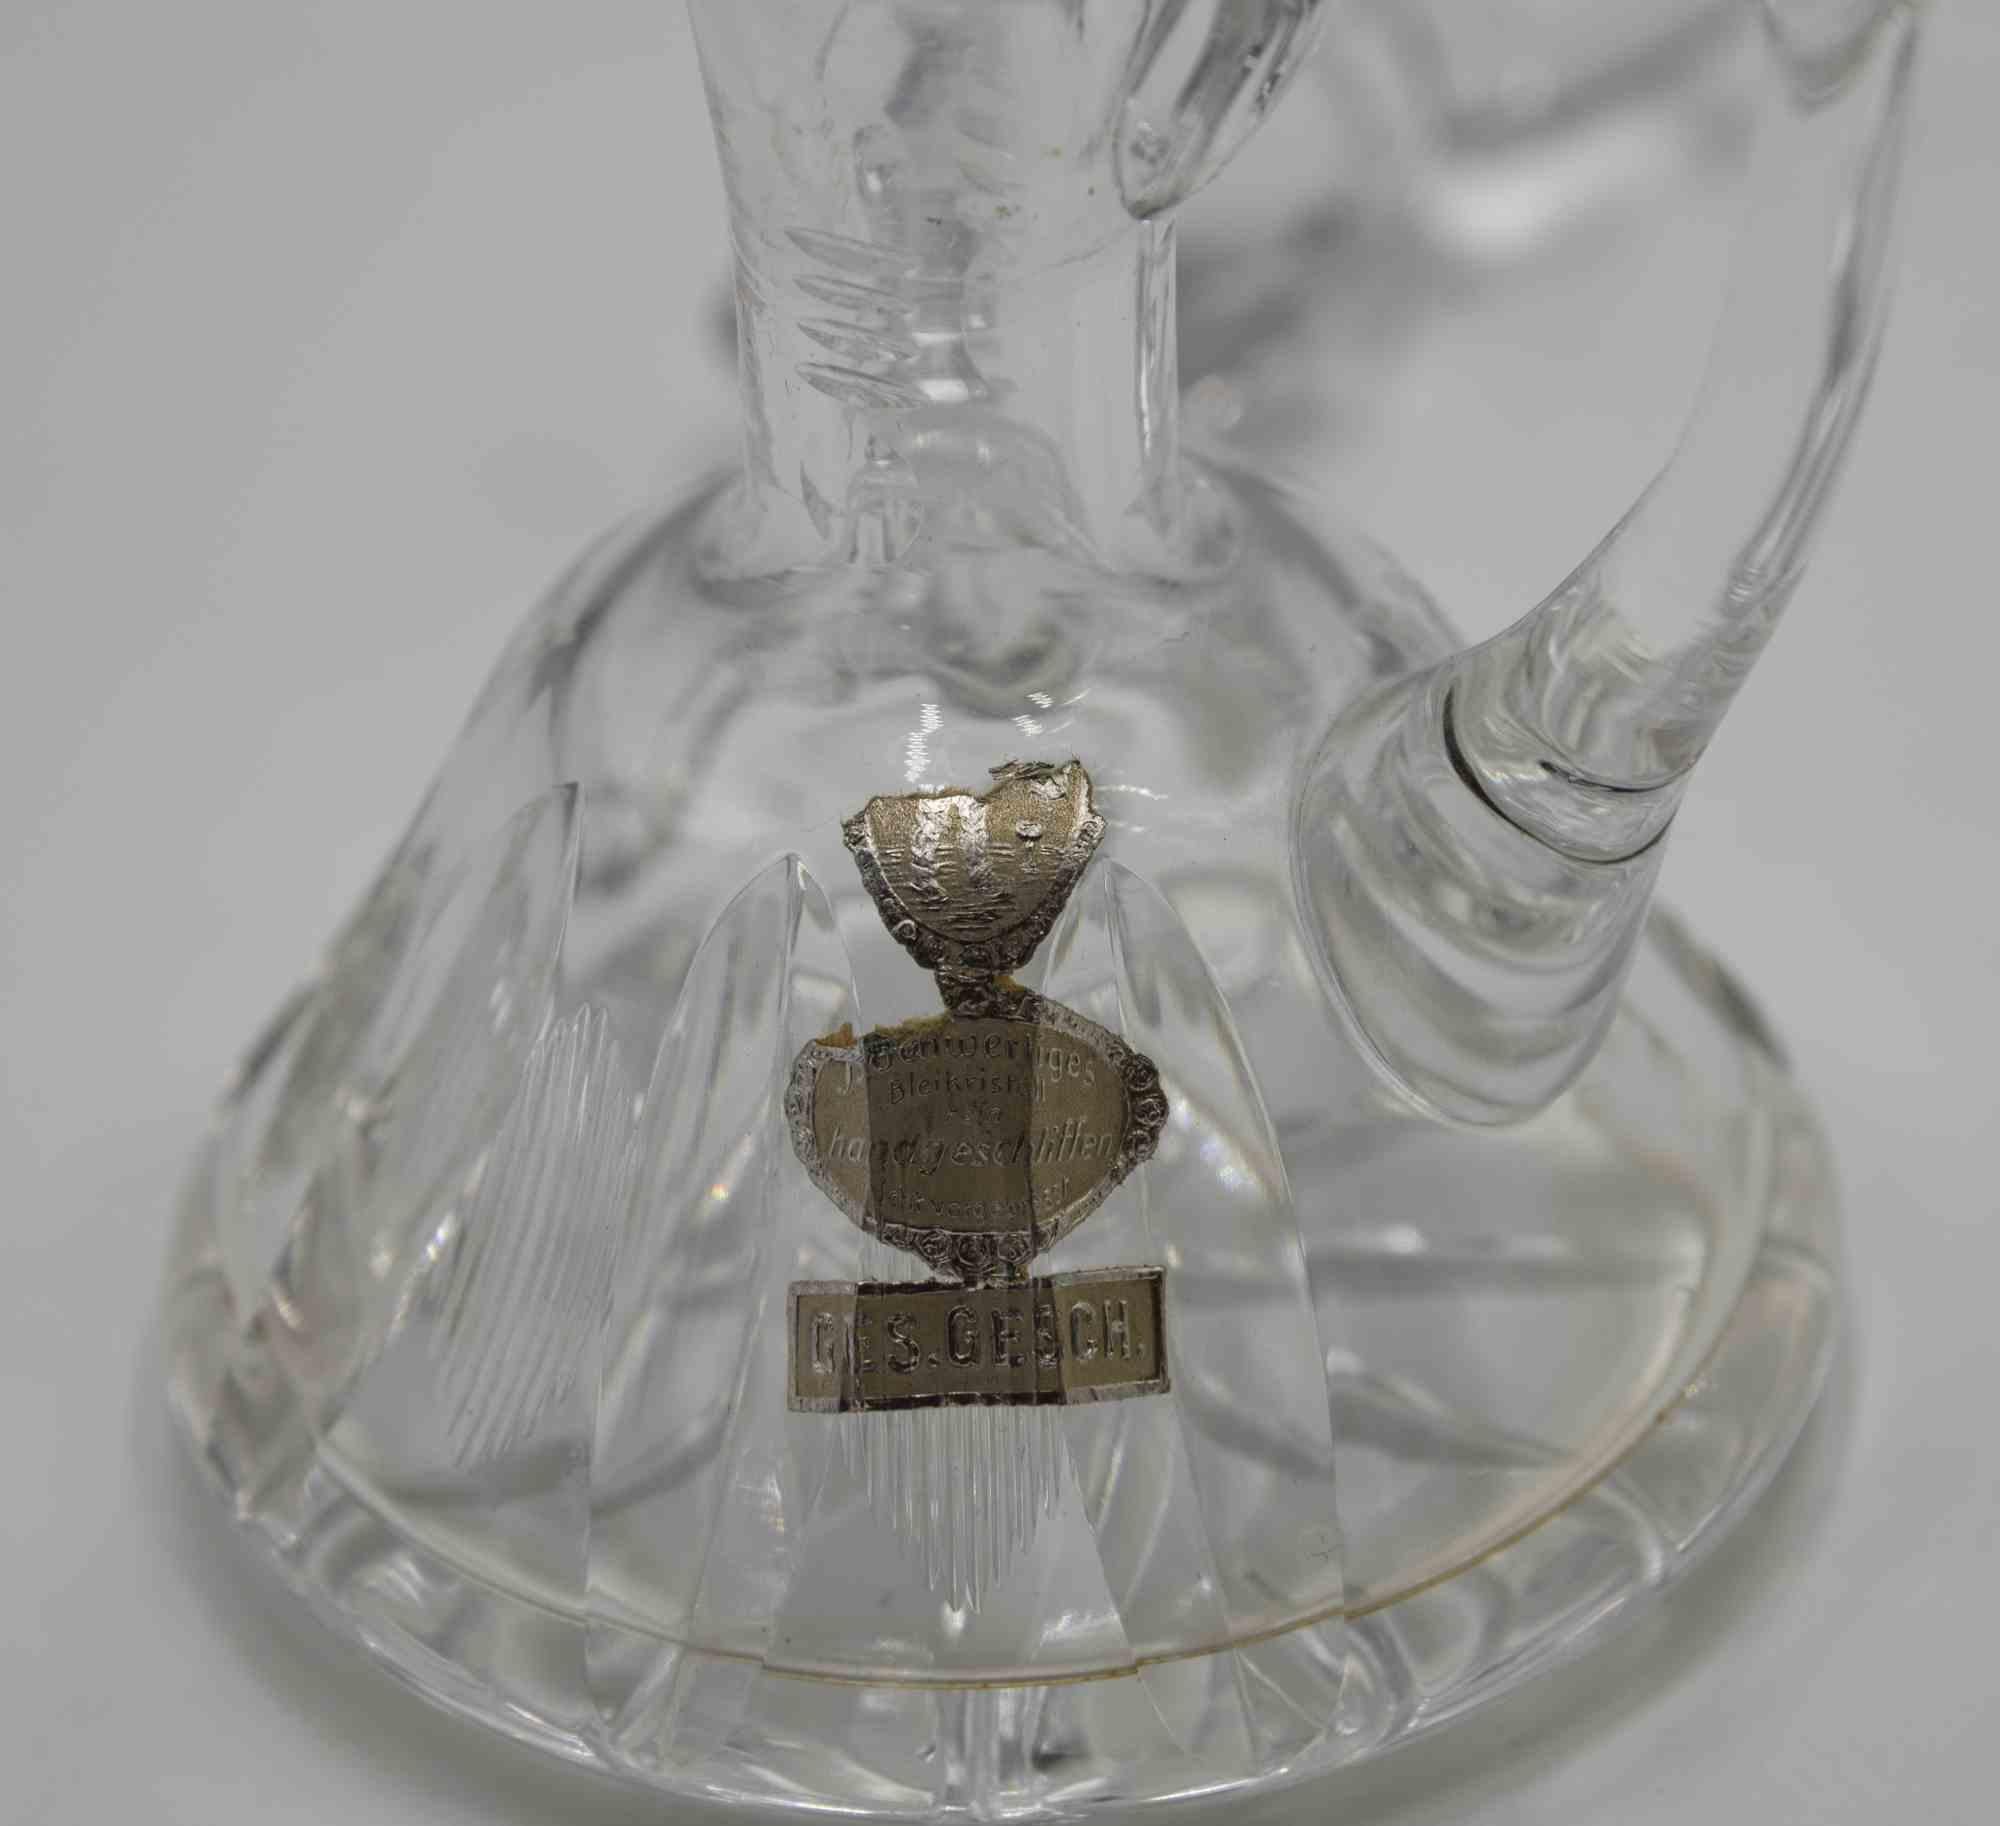 Glass little oil-jug is an decorative object realized in the 1970s.

Art glass elegant little oil-jug perfect for your table.

Produced by German manufacturing as reported on the label.